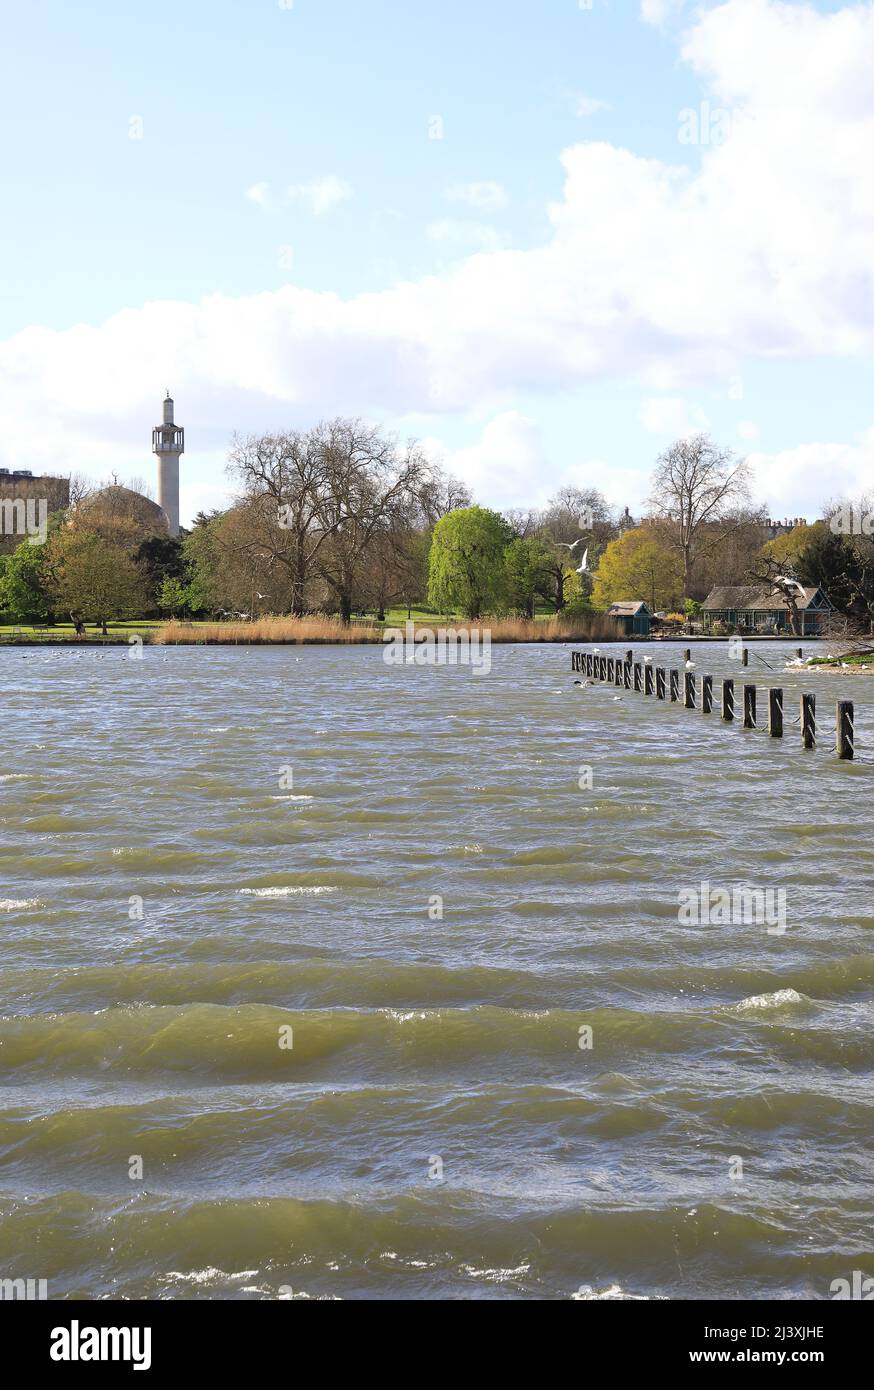 Strong spring winds whip up waves on the lake in Regents Park, looking towards the Central Mosque, in London, UK Stock Photo